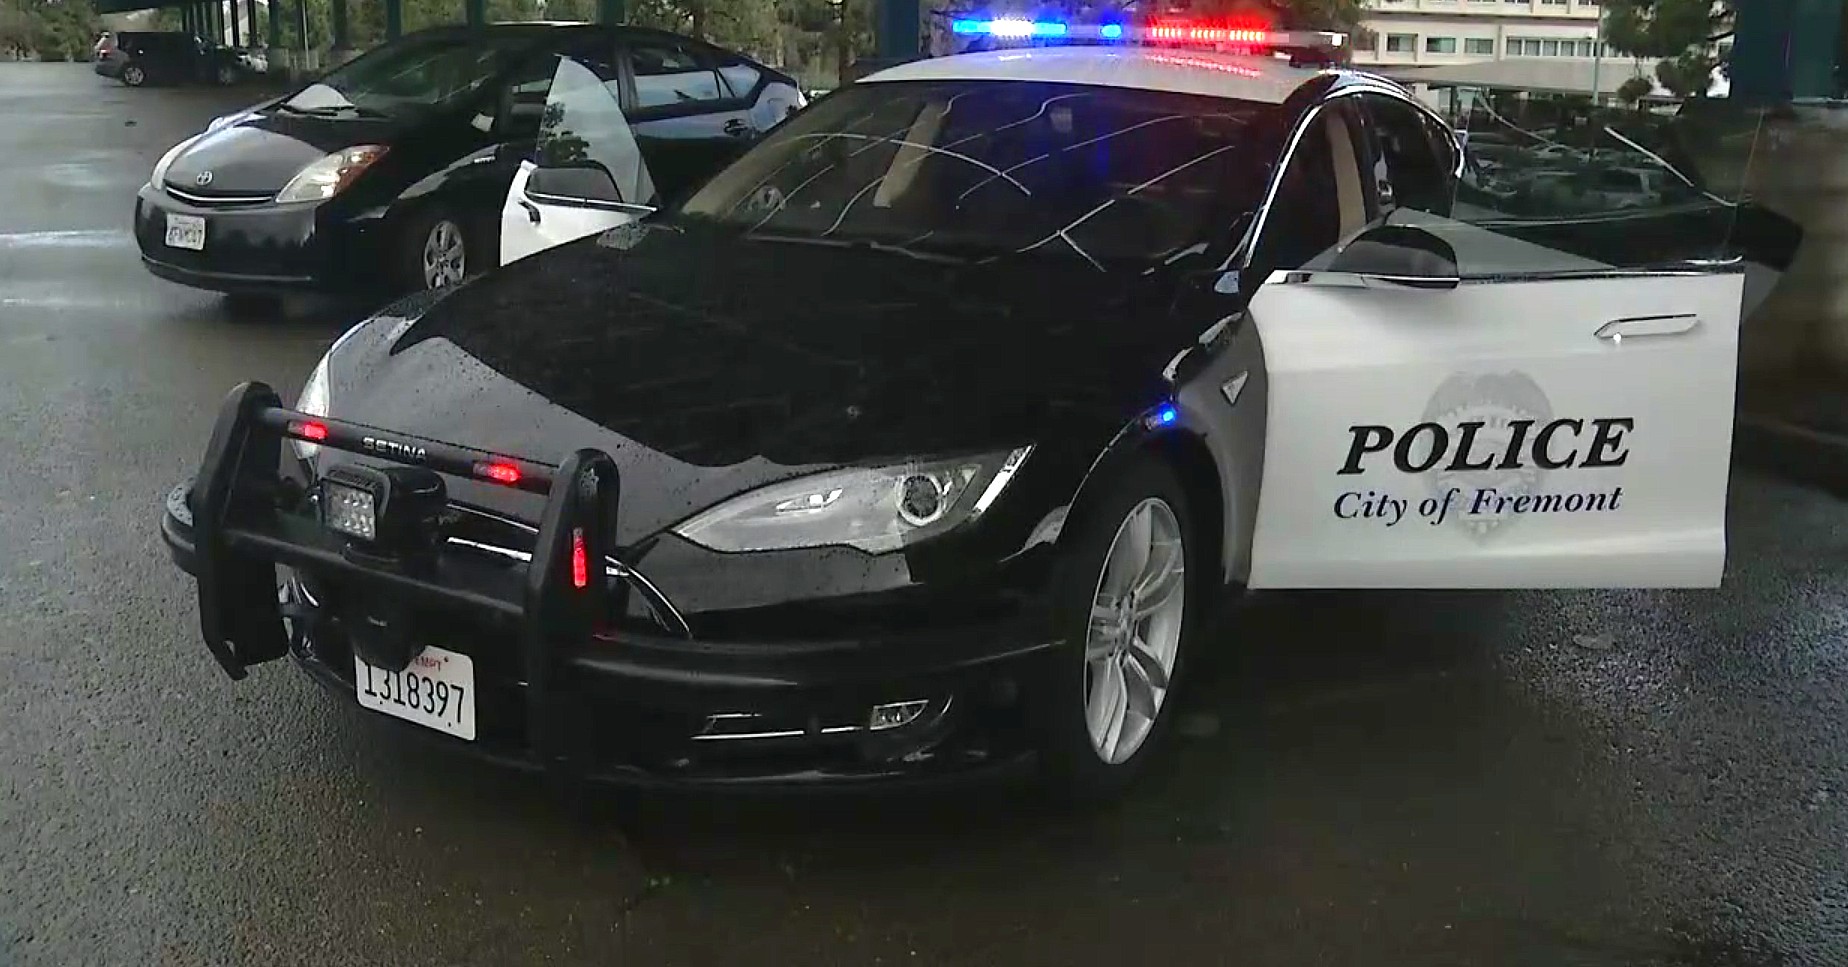 Tesla Model S Fremont PD police cruiser is complete and ready for duty